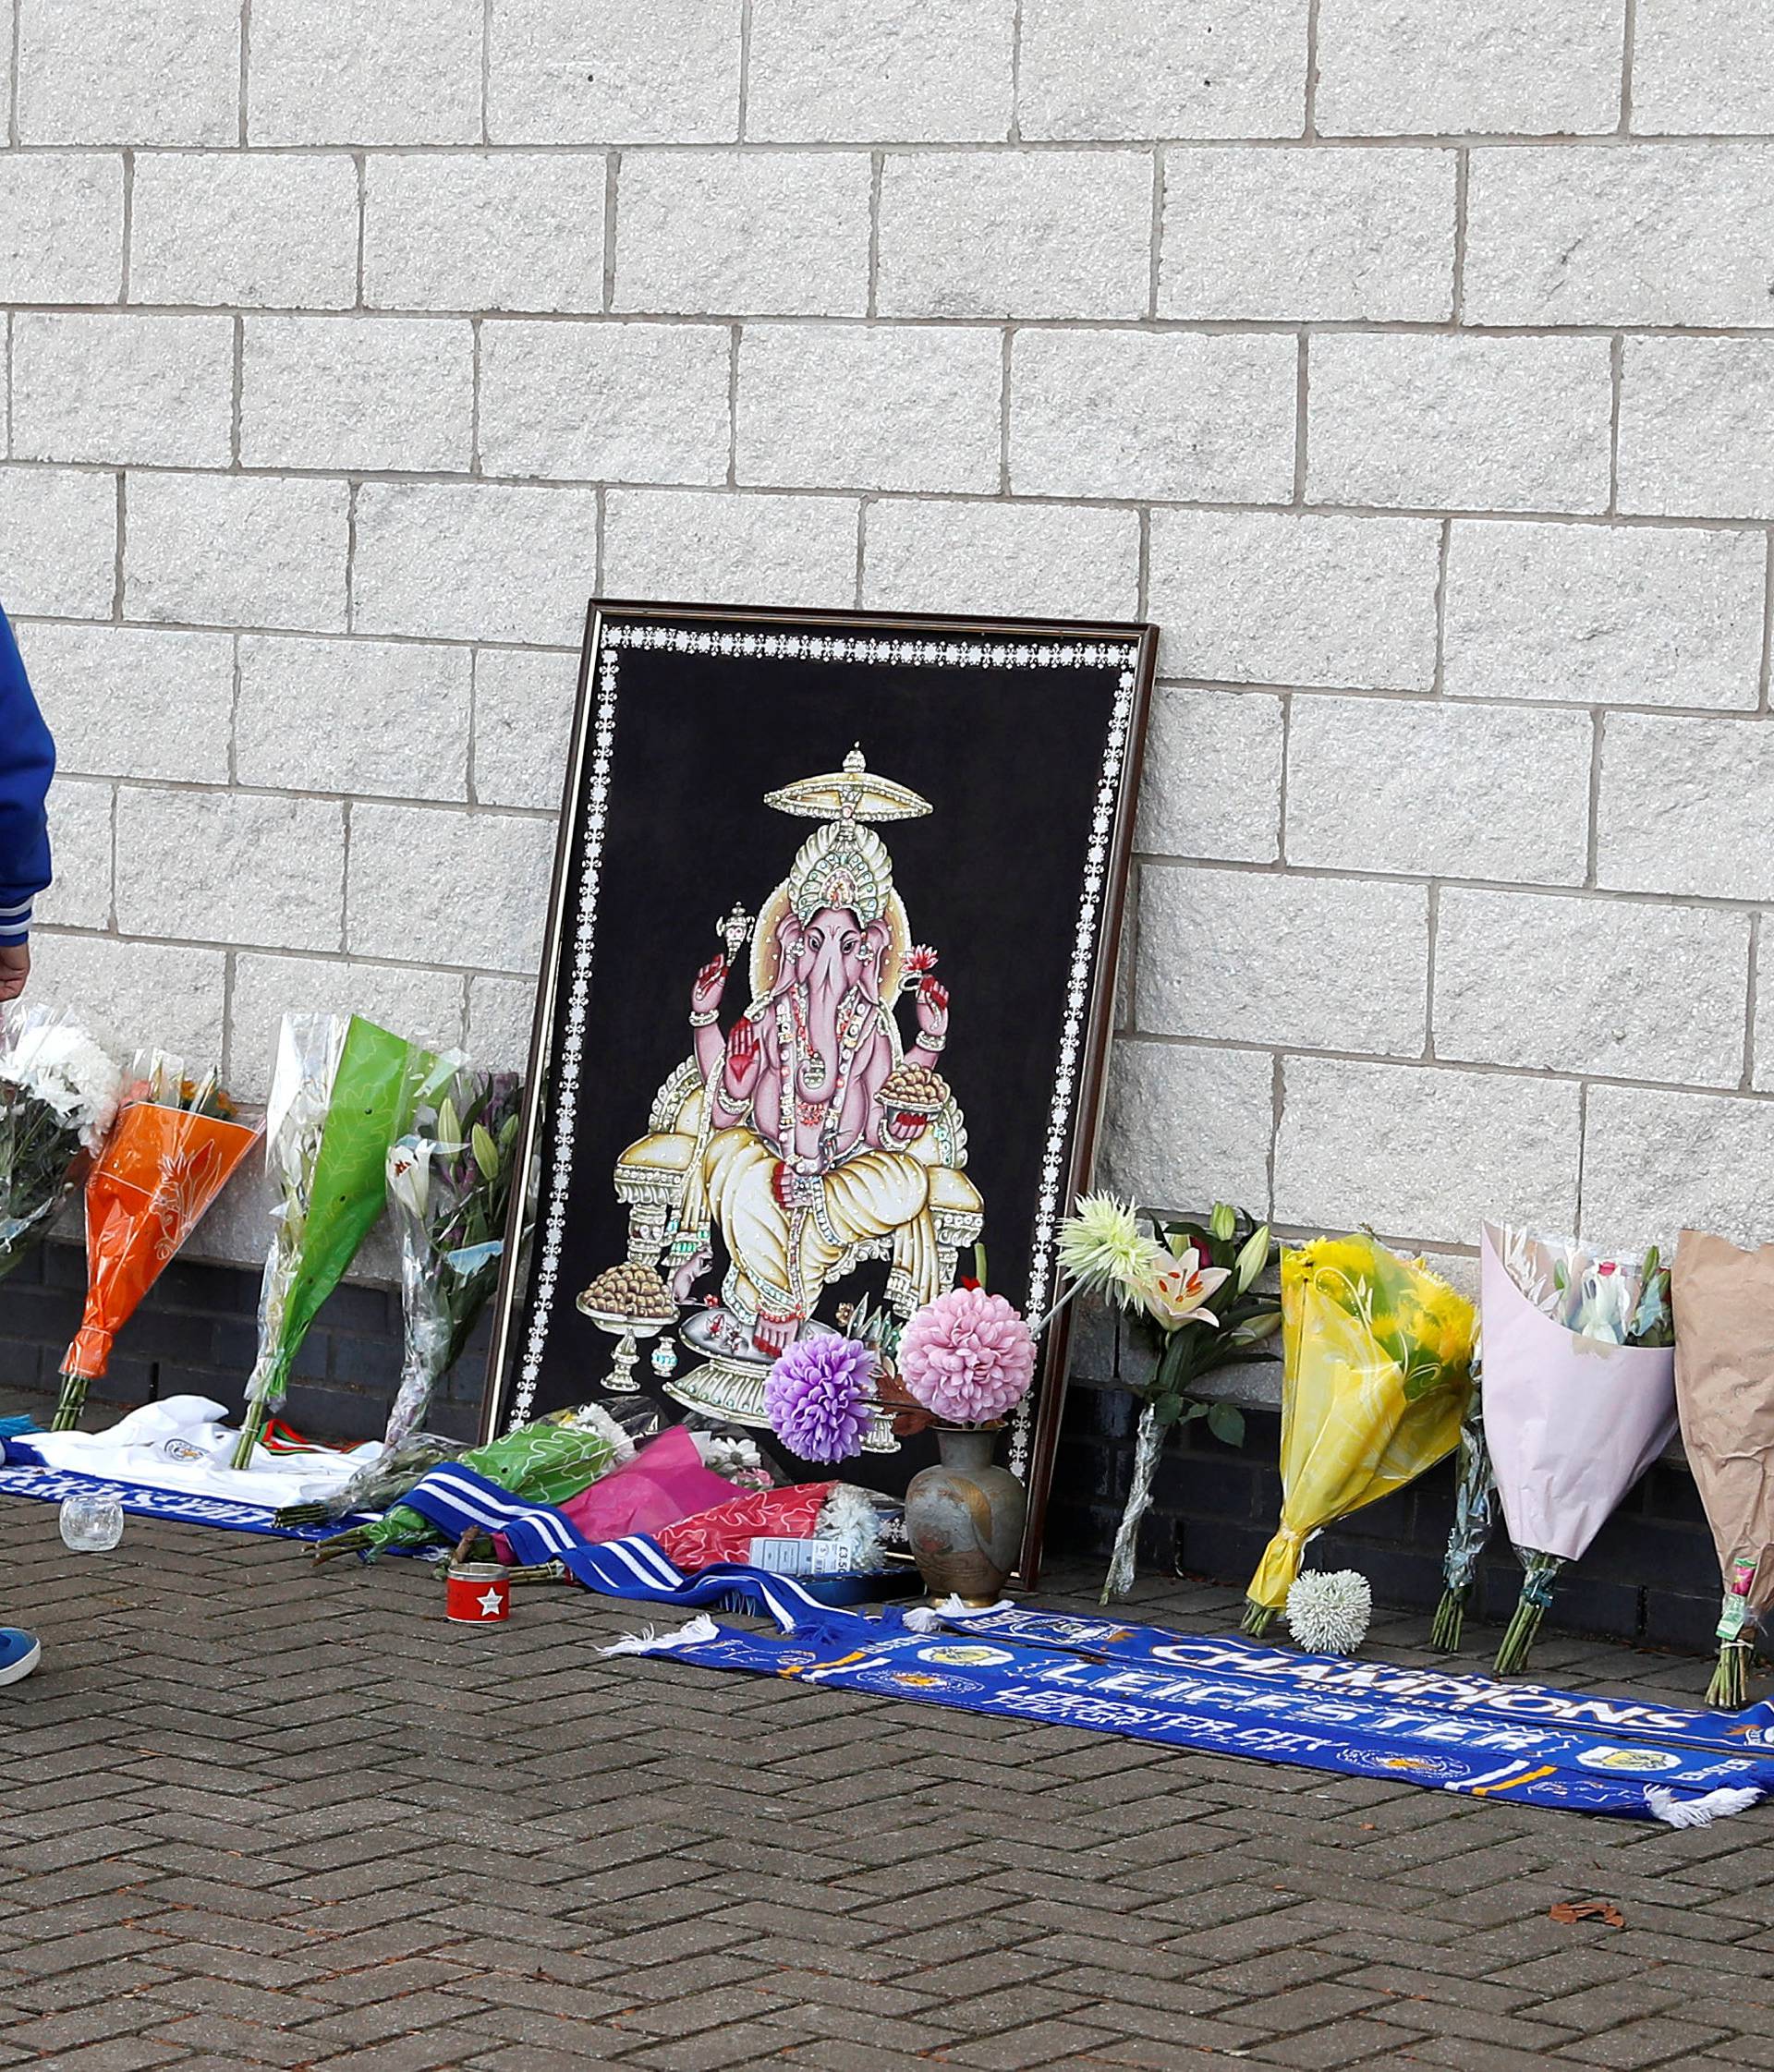 A Leicester City football fan places flowers outside the football stadium after the helicopter of the club owner Thai businessman Vichai Srivaddhanaprabha crashed when leaving the ground on Saturday evening after the match, in Leicester